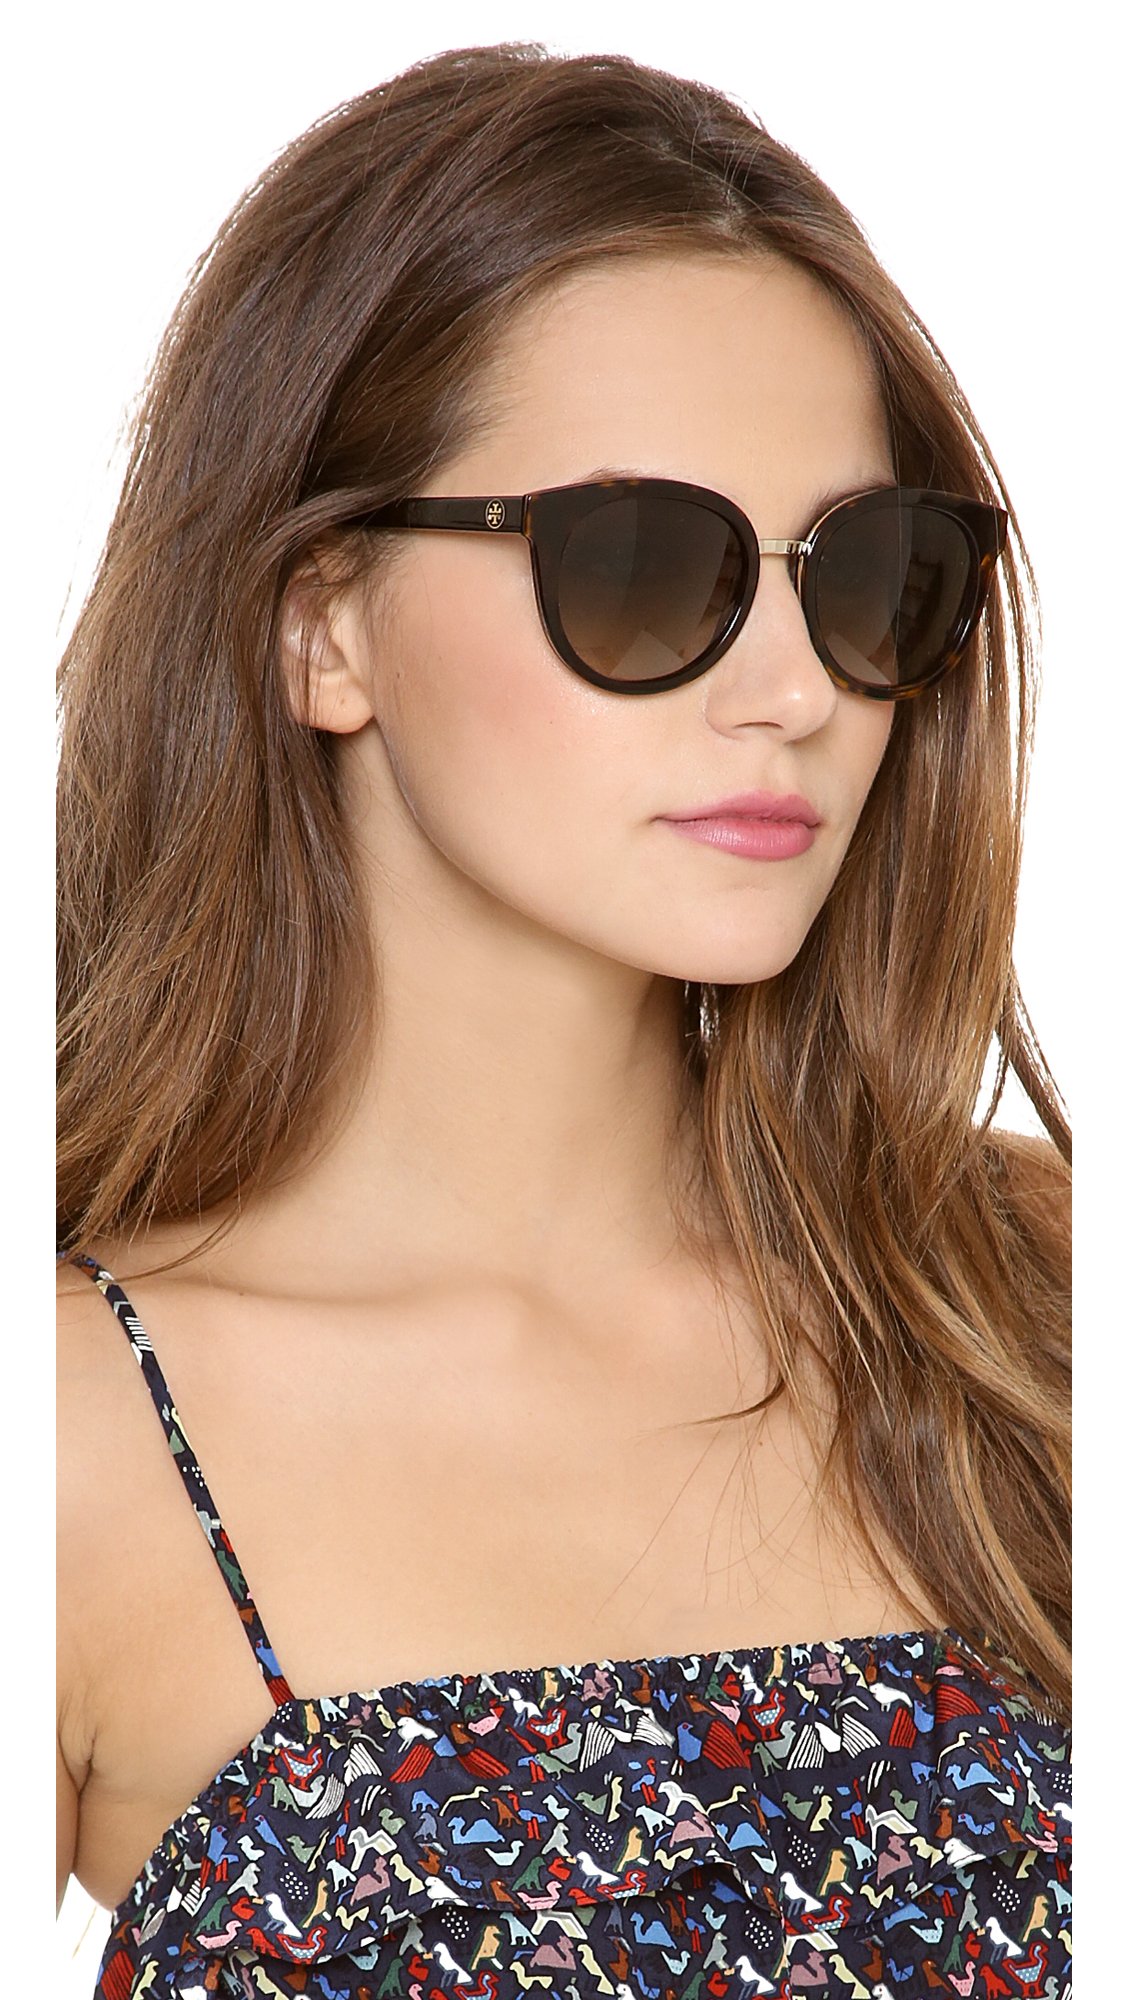 Tory Burch Eclectic Sunglasses - Tortoise/Brown Gradient | Lyst